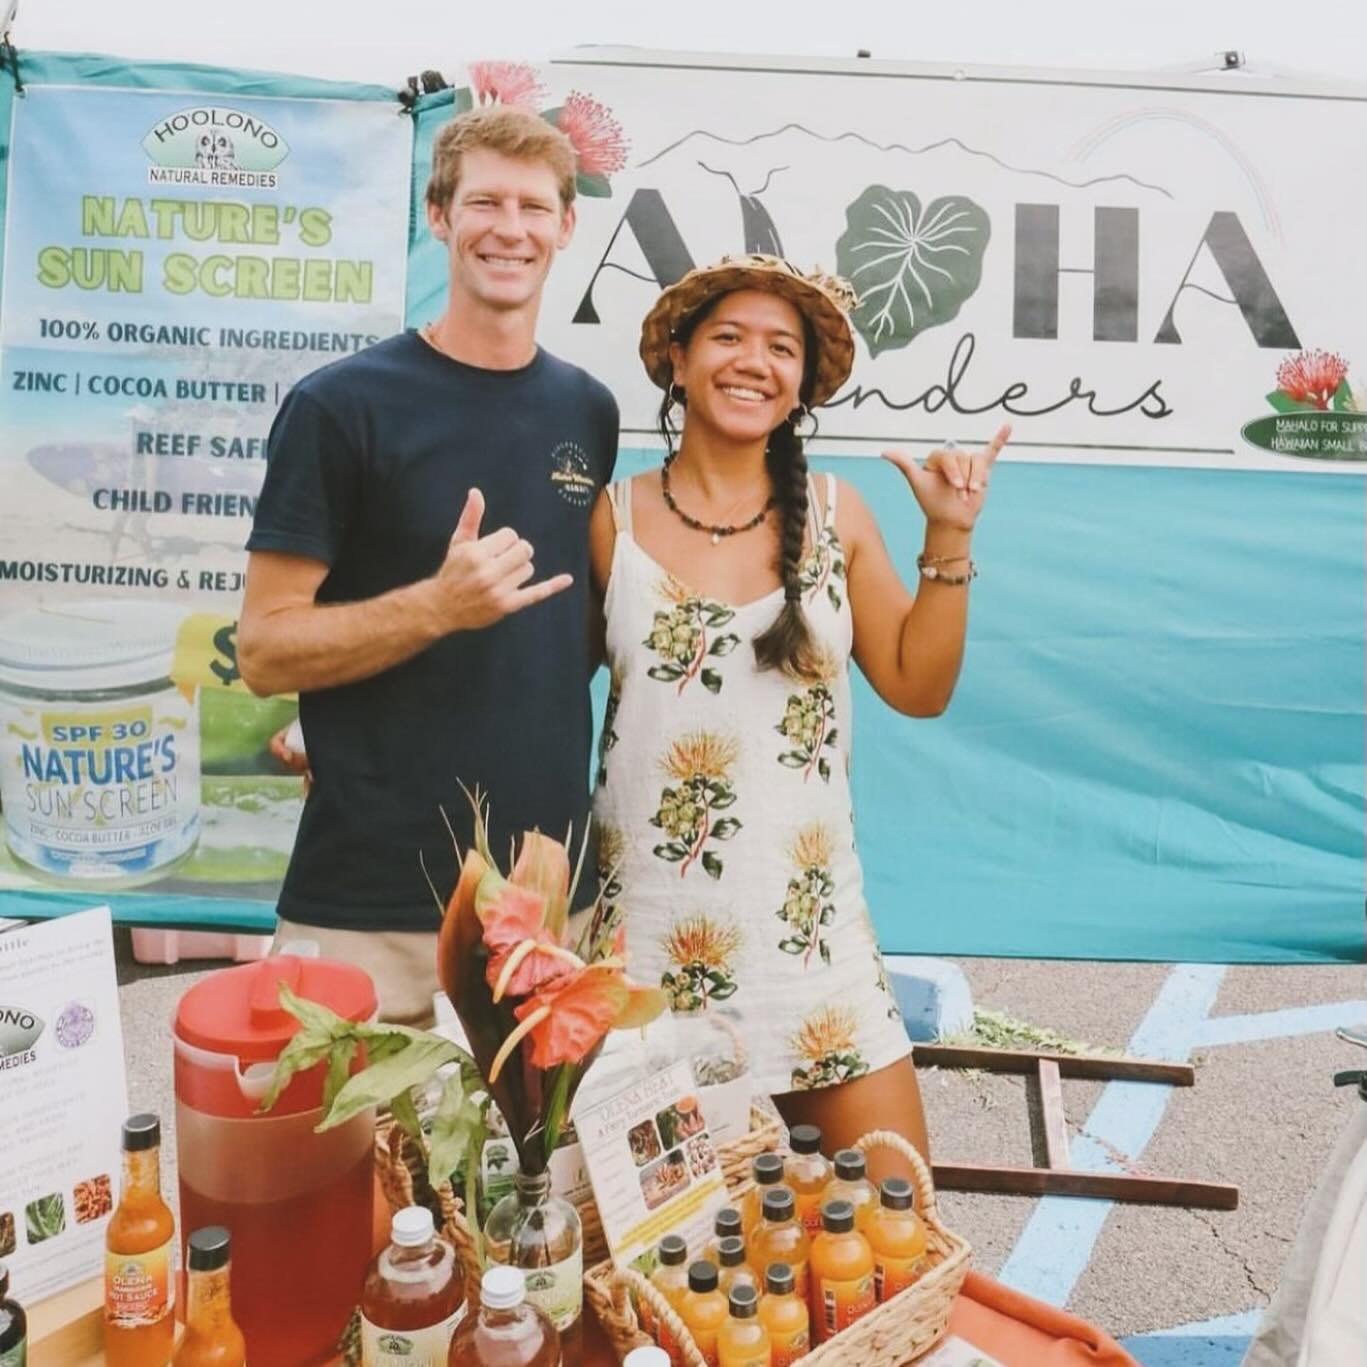 For the adventurous and natural lifestyle, @alohawanders is a one-stop shop for pure local herbal remedies, unique velvet pearl &amp; handmade jewelry, and inspiring aloha wear. 🌿🌊

Kick off your next adventure this Saturday at our Haleiwa Market a